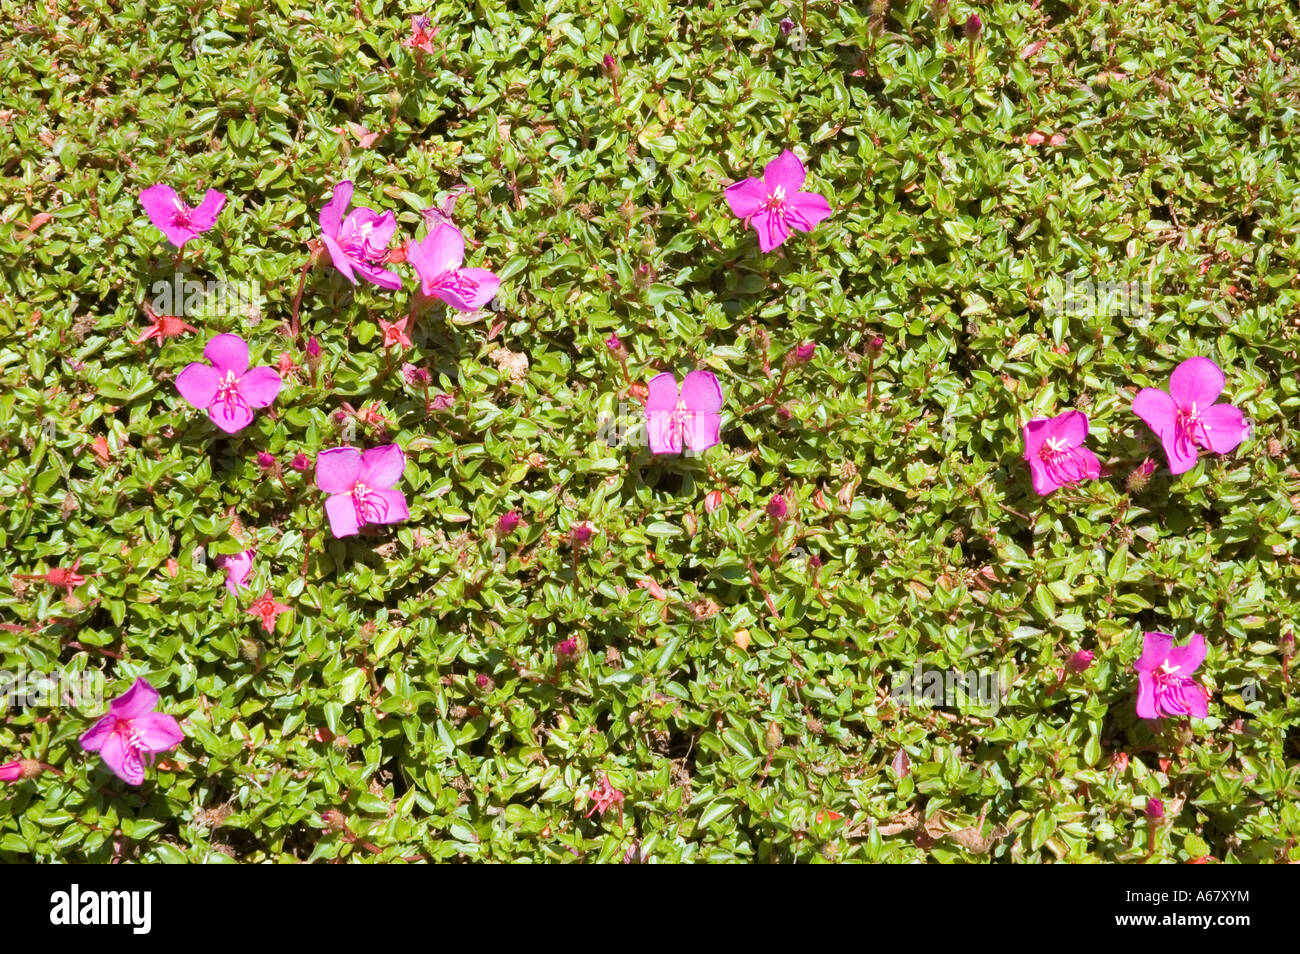 Stock photograph of pink flowers on green background. Stock Photo